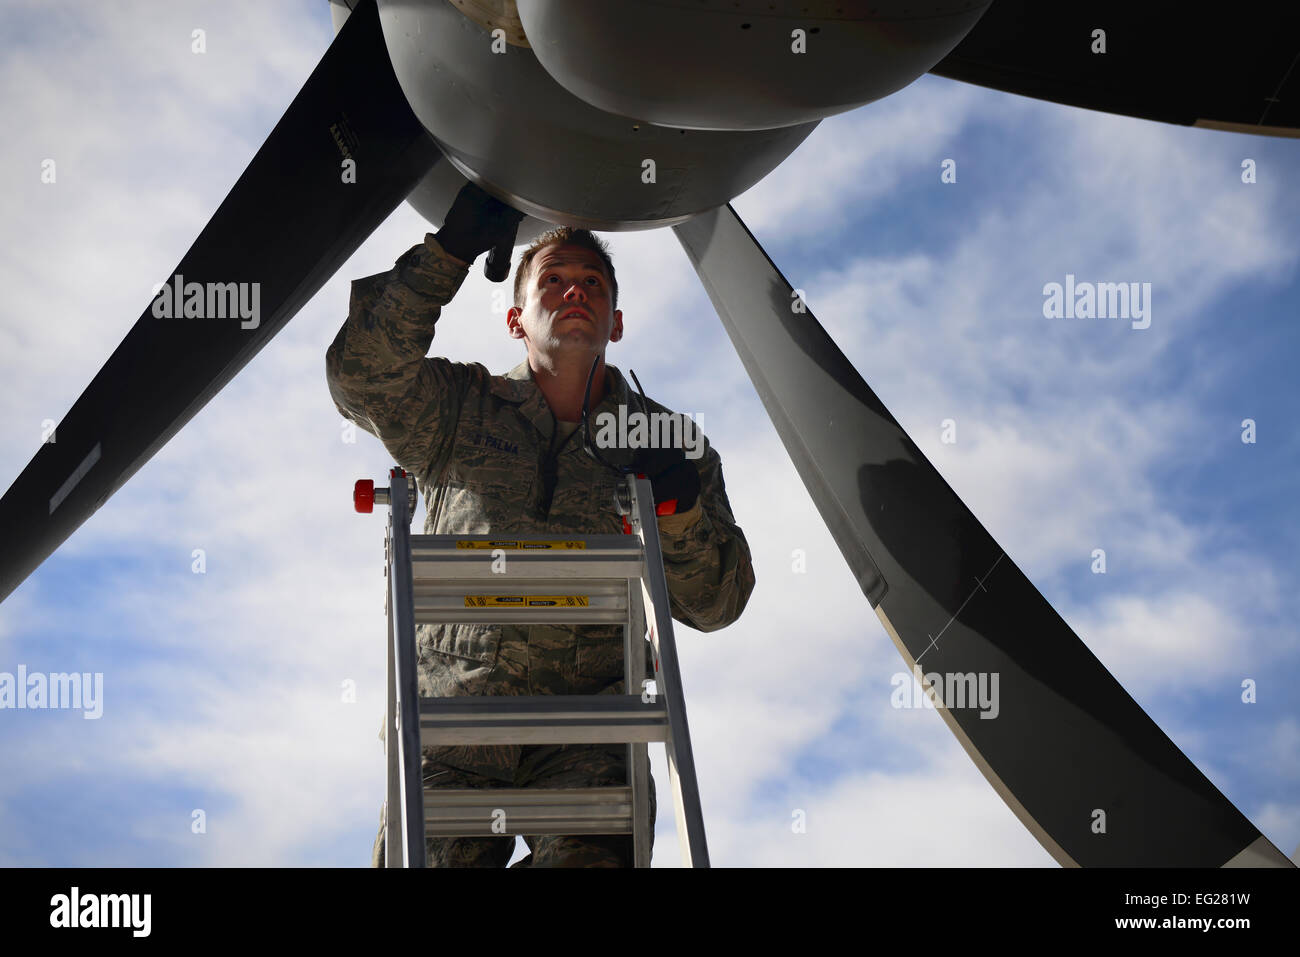 Tech. Sgt. James DiPalma, 27th Special Operations Aircraft Maintenance Squadron crew chief, performs intake and exhaust checks on an MC-130J Commando II Dec. 18, 2014, at Cannon Air Force Base, N.M. The checks ensure there are no foreign objects endangering the gunship’s engines.  Airman 1st Class Shelby Kay-Fantozzi   For more great Air Force photos, visit our Facebook page: www.facebook.com/usairforce  https://www.facebook.com/USairforce  . Stock Photo